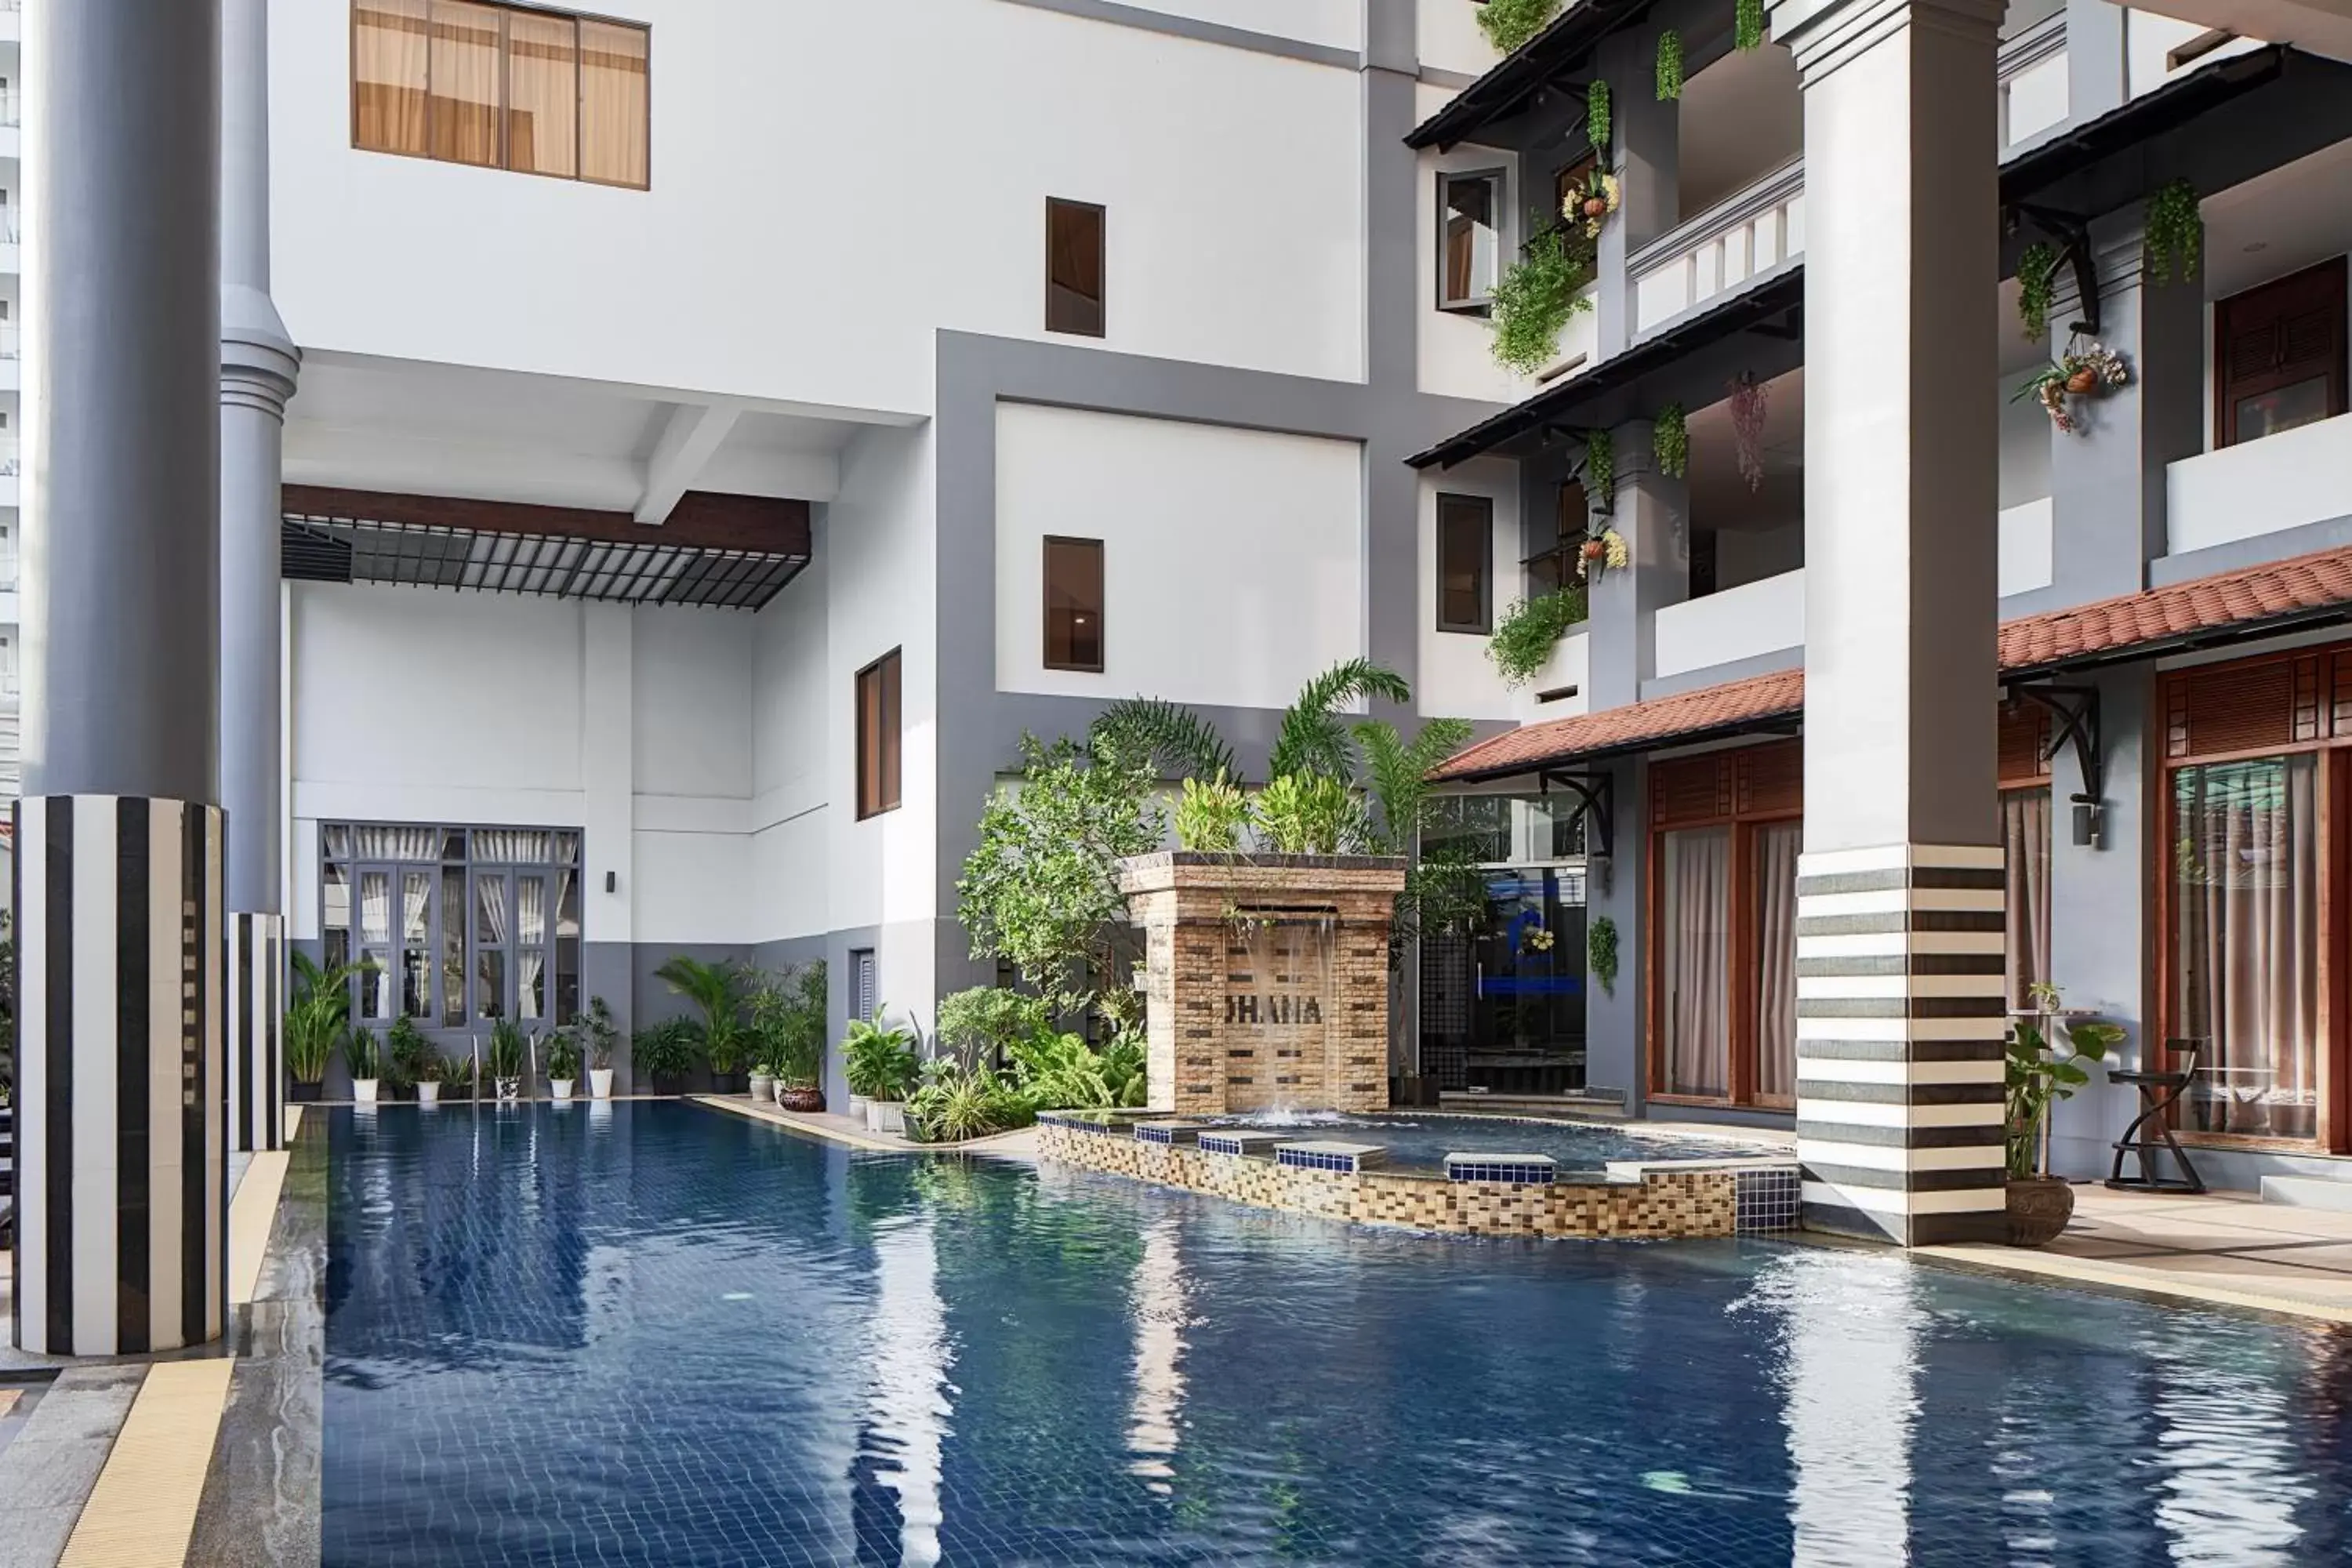 Property building, Swimming Pool in Ohana Phnom Penh Palace Hotel